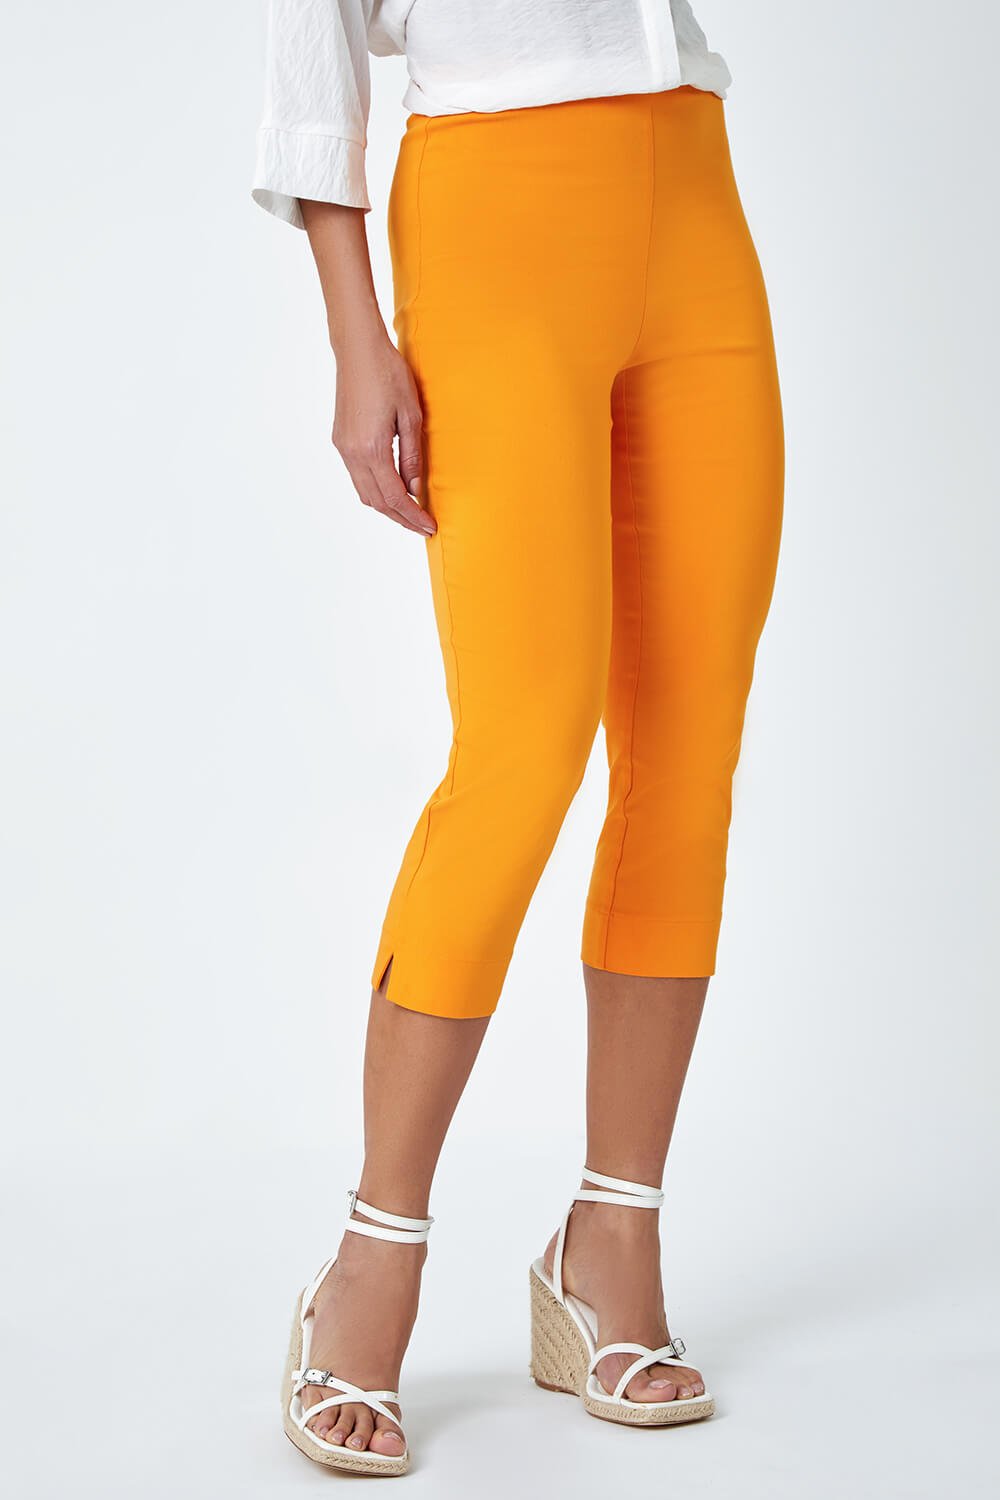 MANGO Cropped Stretch Trousers, Image 4 of 5